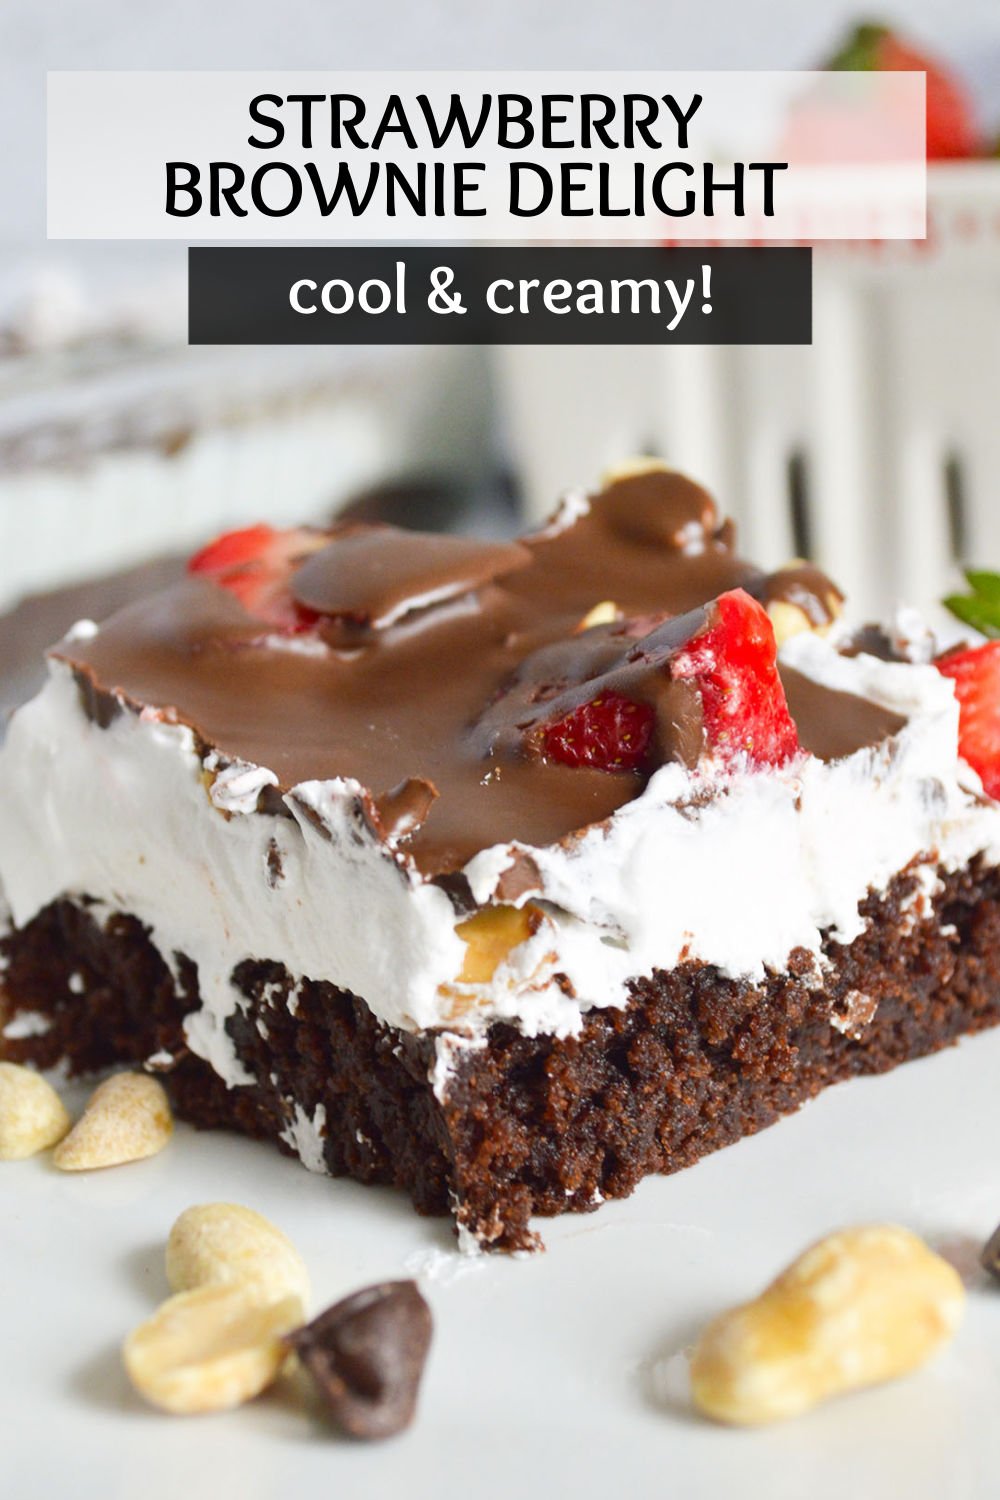 This easy Strawberry Brownie Delight is a fantastic layered dessert with fudgy brownie, whipped topping, slices of juicy, fresh strawberries, all drizzled with chocolate. Delightful, indeed! | www.persnicketyplates.com